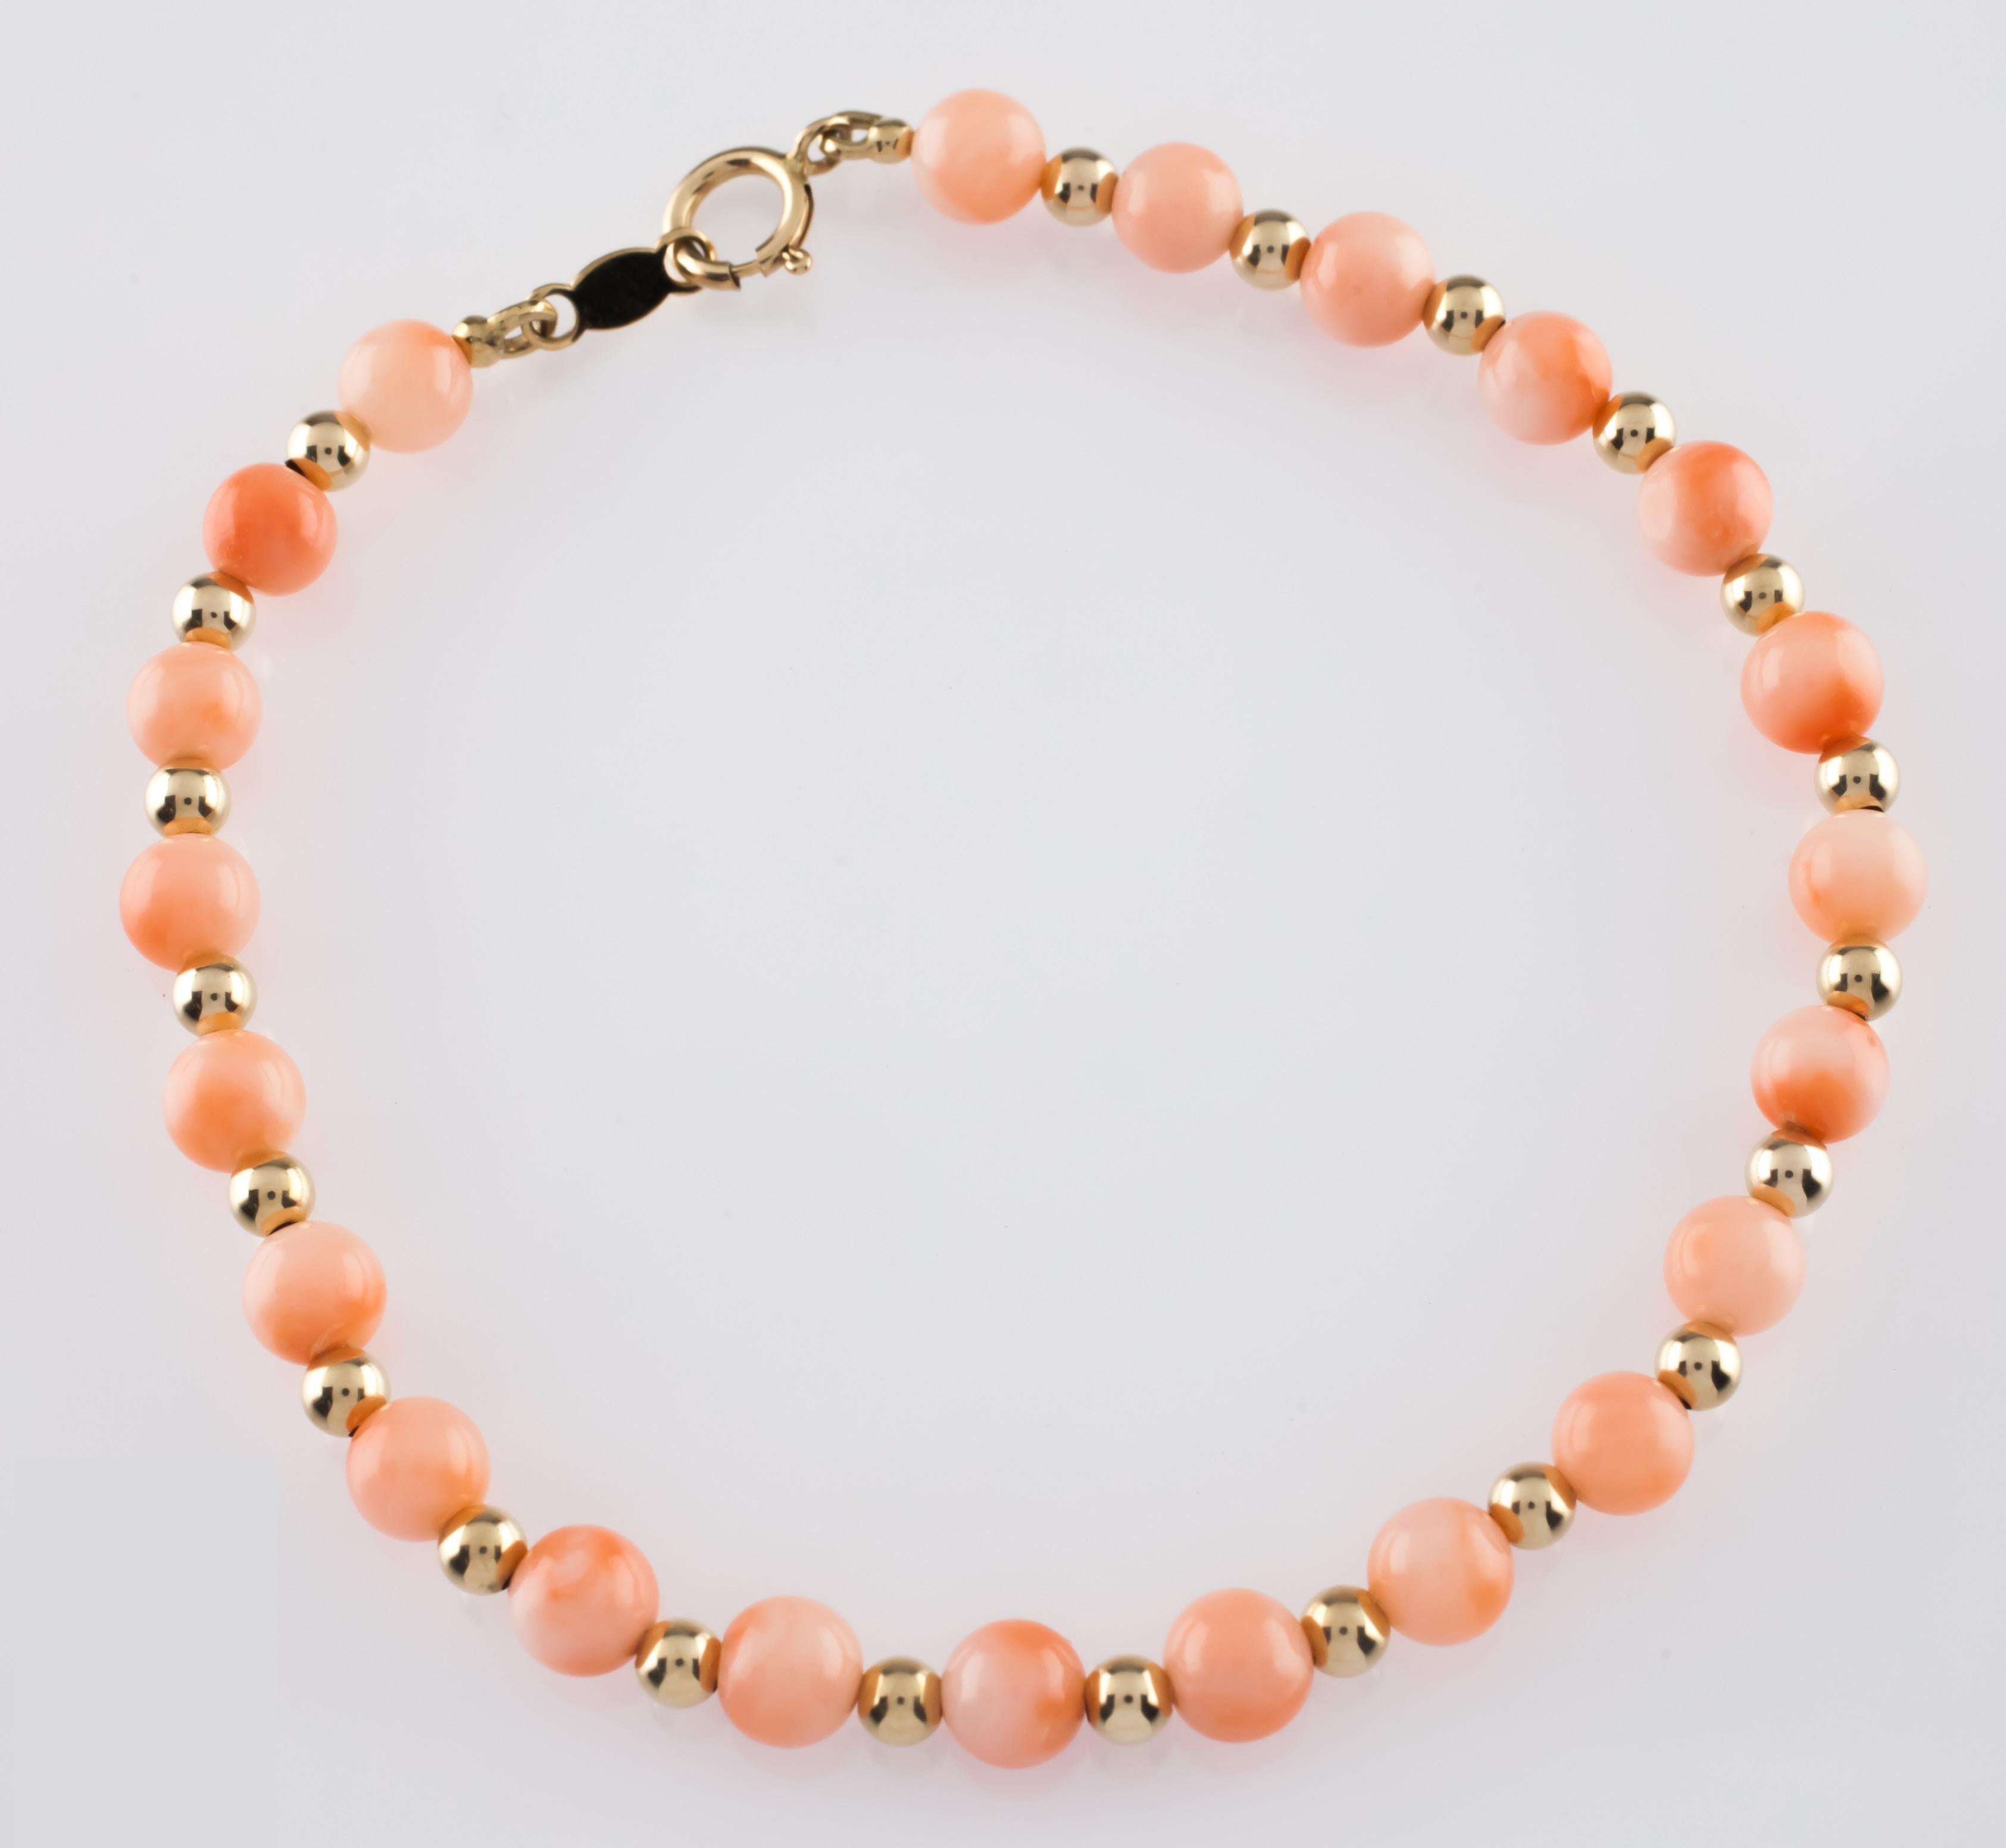 Gorgeous Coral Beaded Bracelet
Features Round Coral Beads (Appx 4-5 mm in diameter) interspersed with small gold beads (appx 2 mm in diameter)
Total Length = 6.75